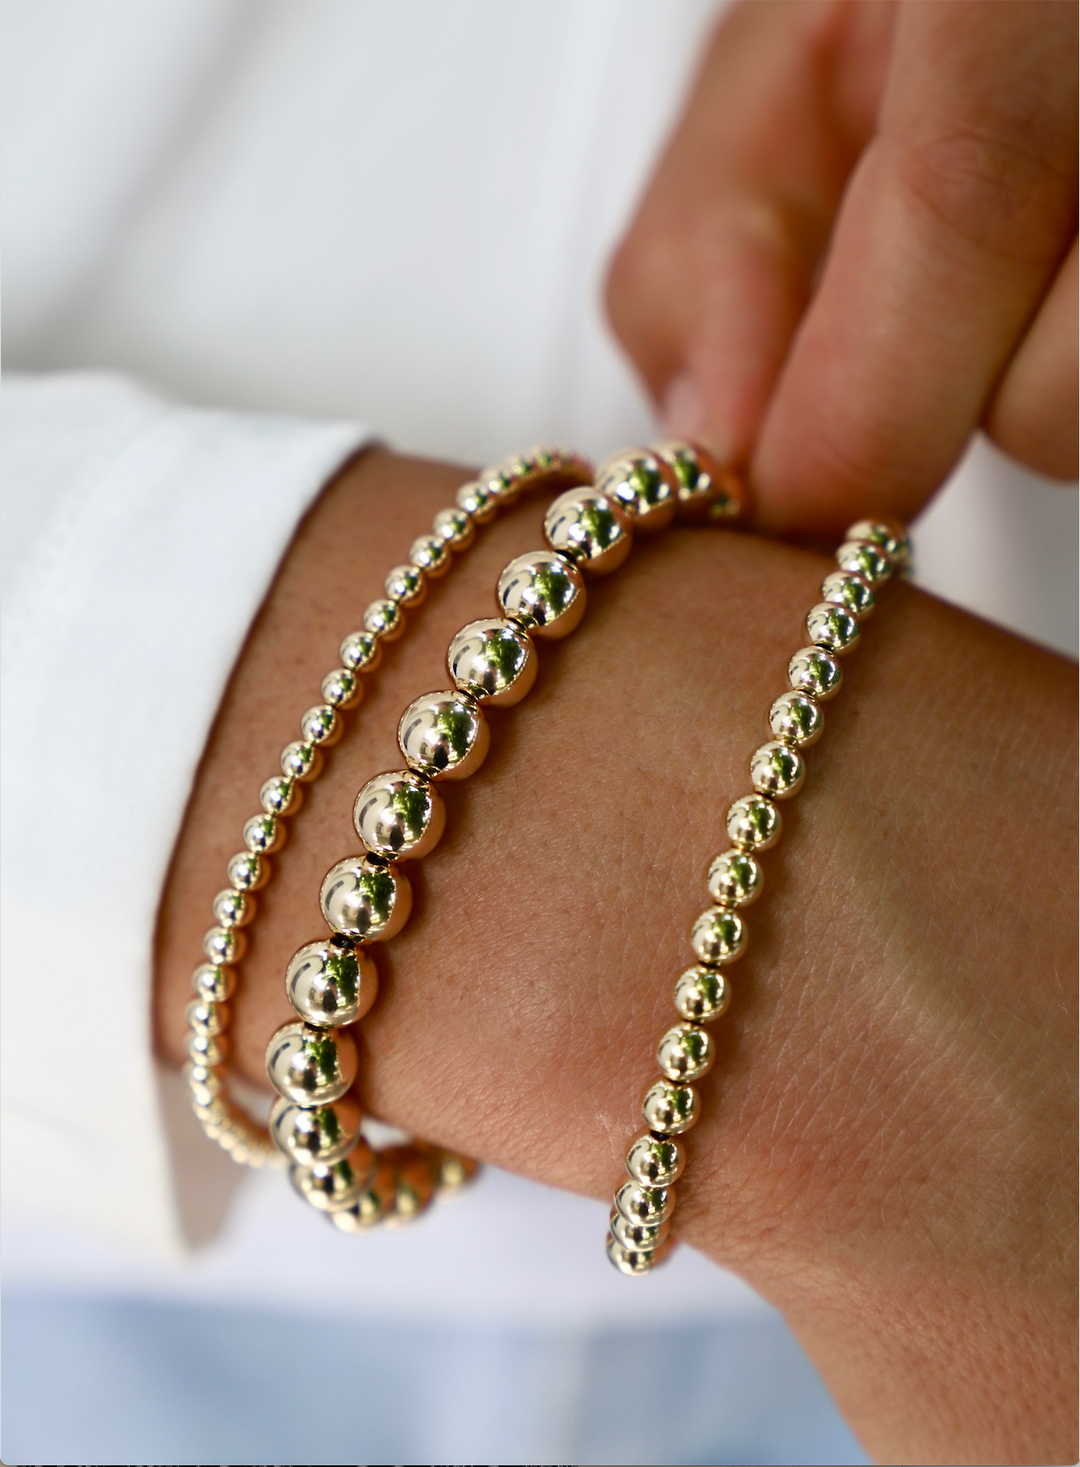 The Katie 3mm 4mm 5mm 6mm 8mm 14k Gold Filled Bead Bracelet non